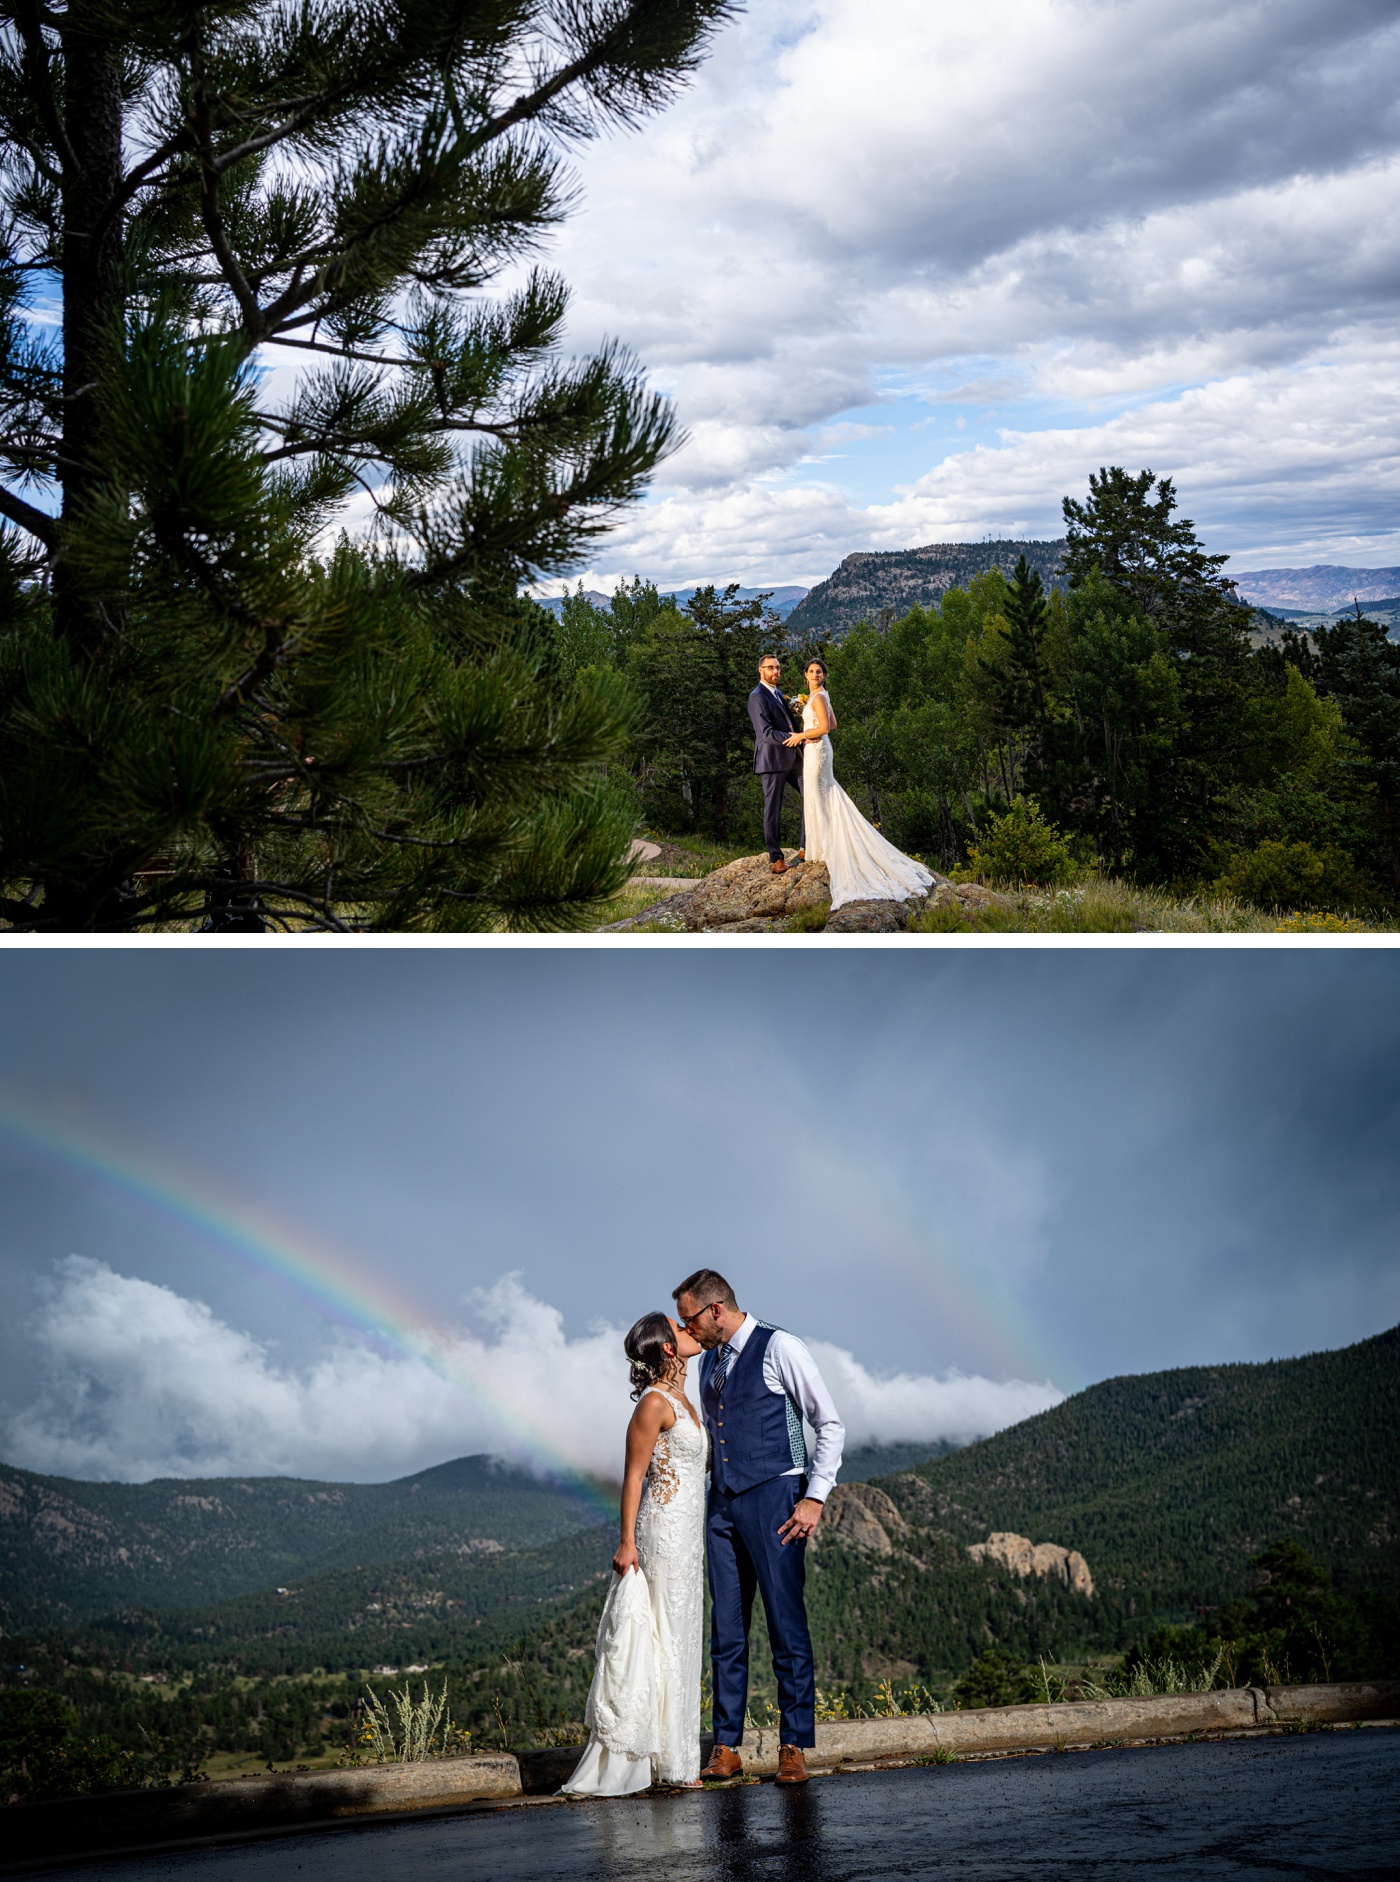 Bride and groom portraits in the rocky mountains - casual wedding in estes park